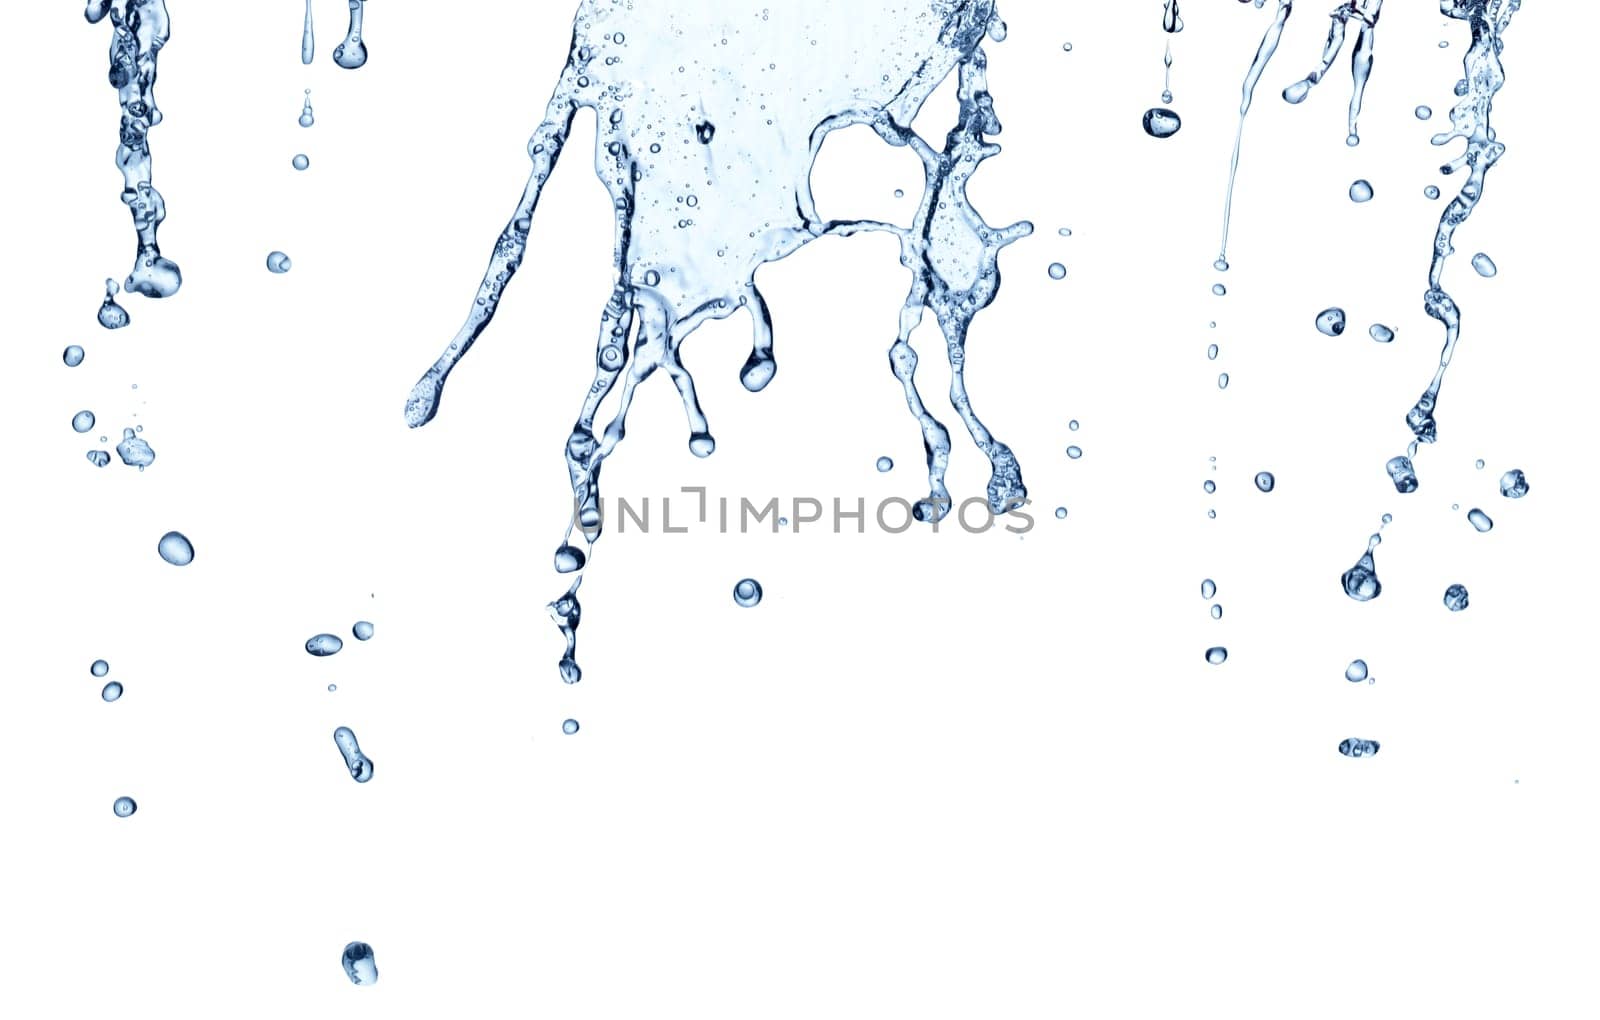 collection of various water drops on white background